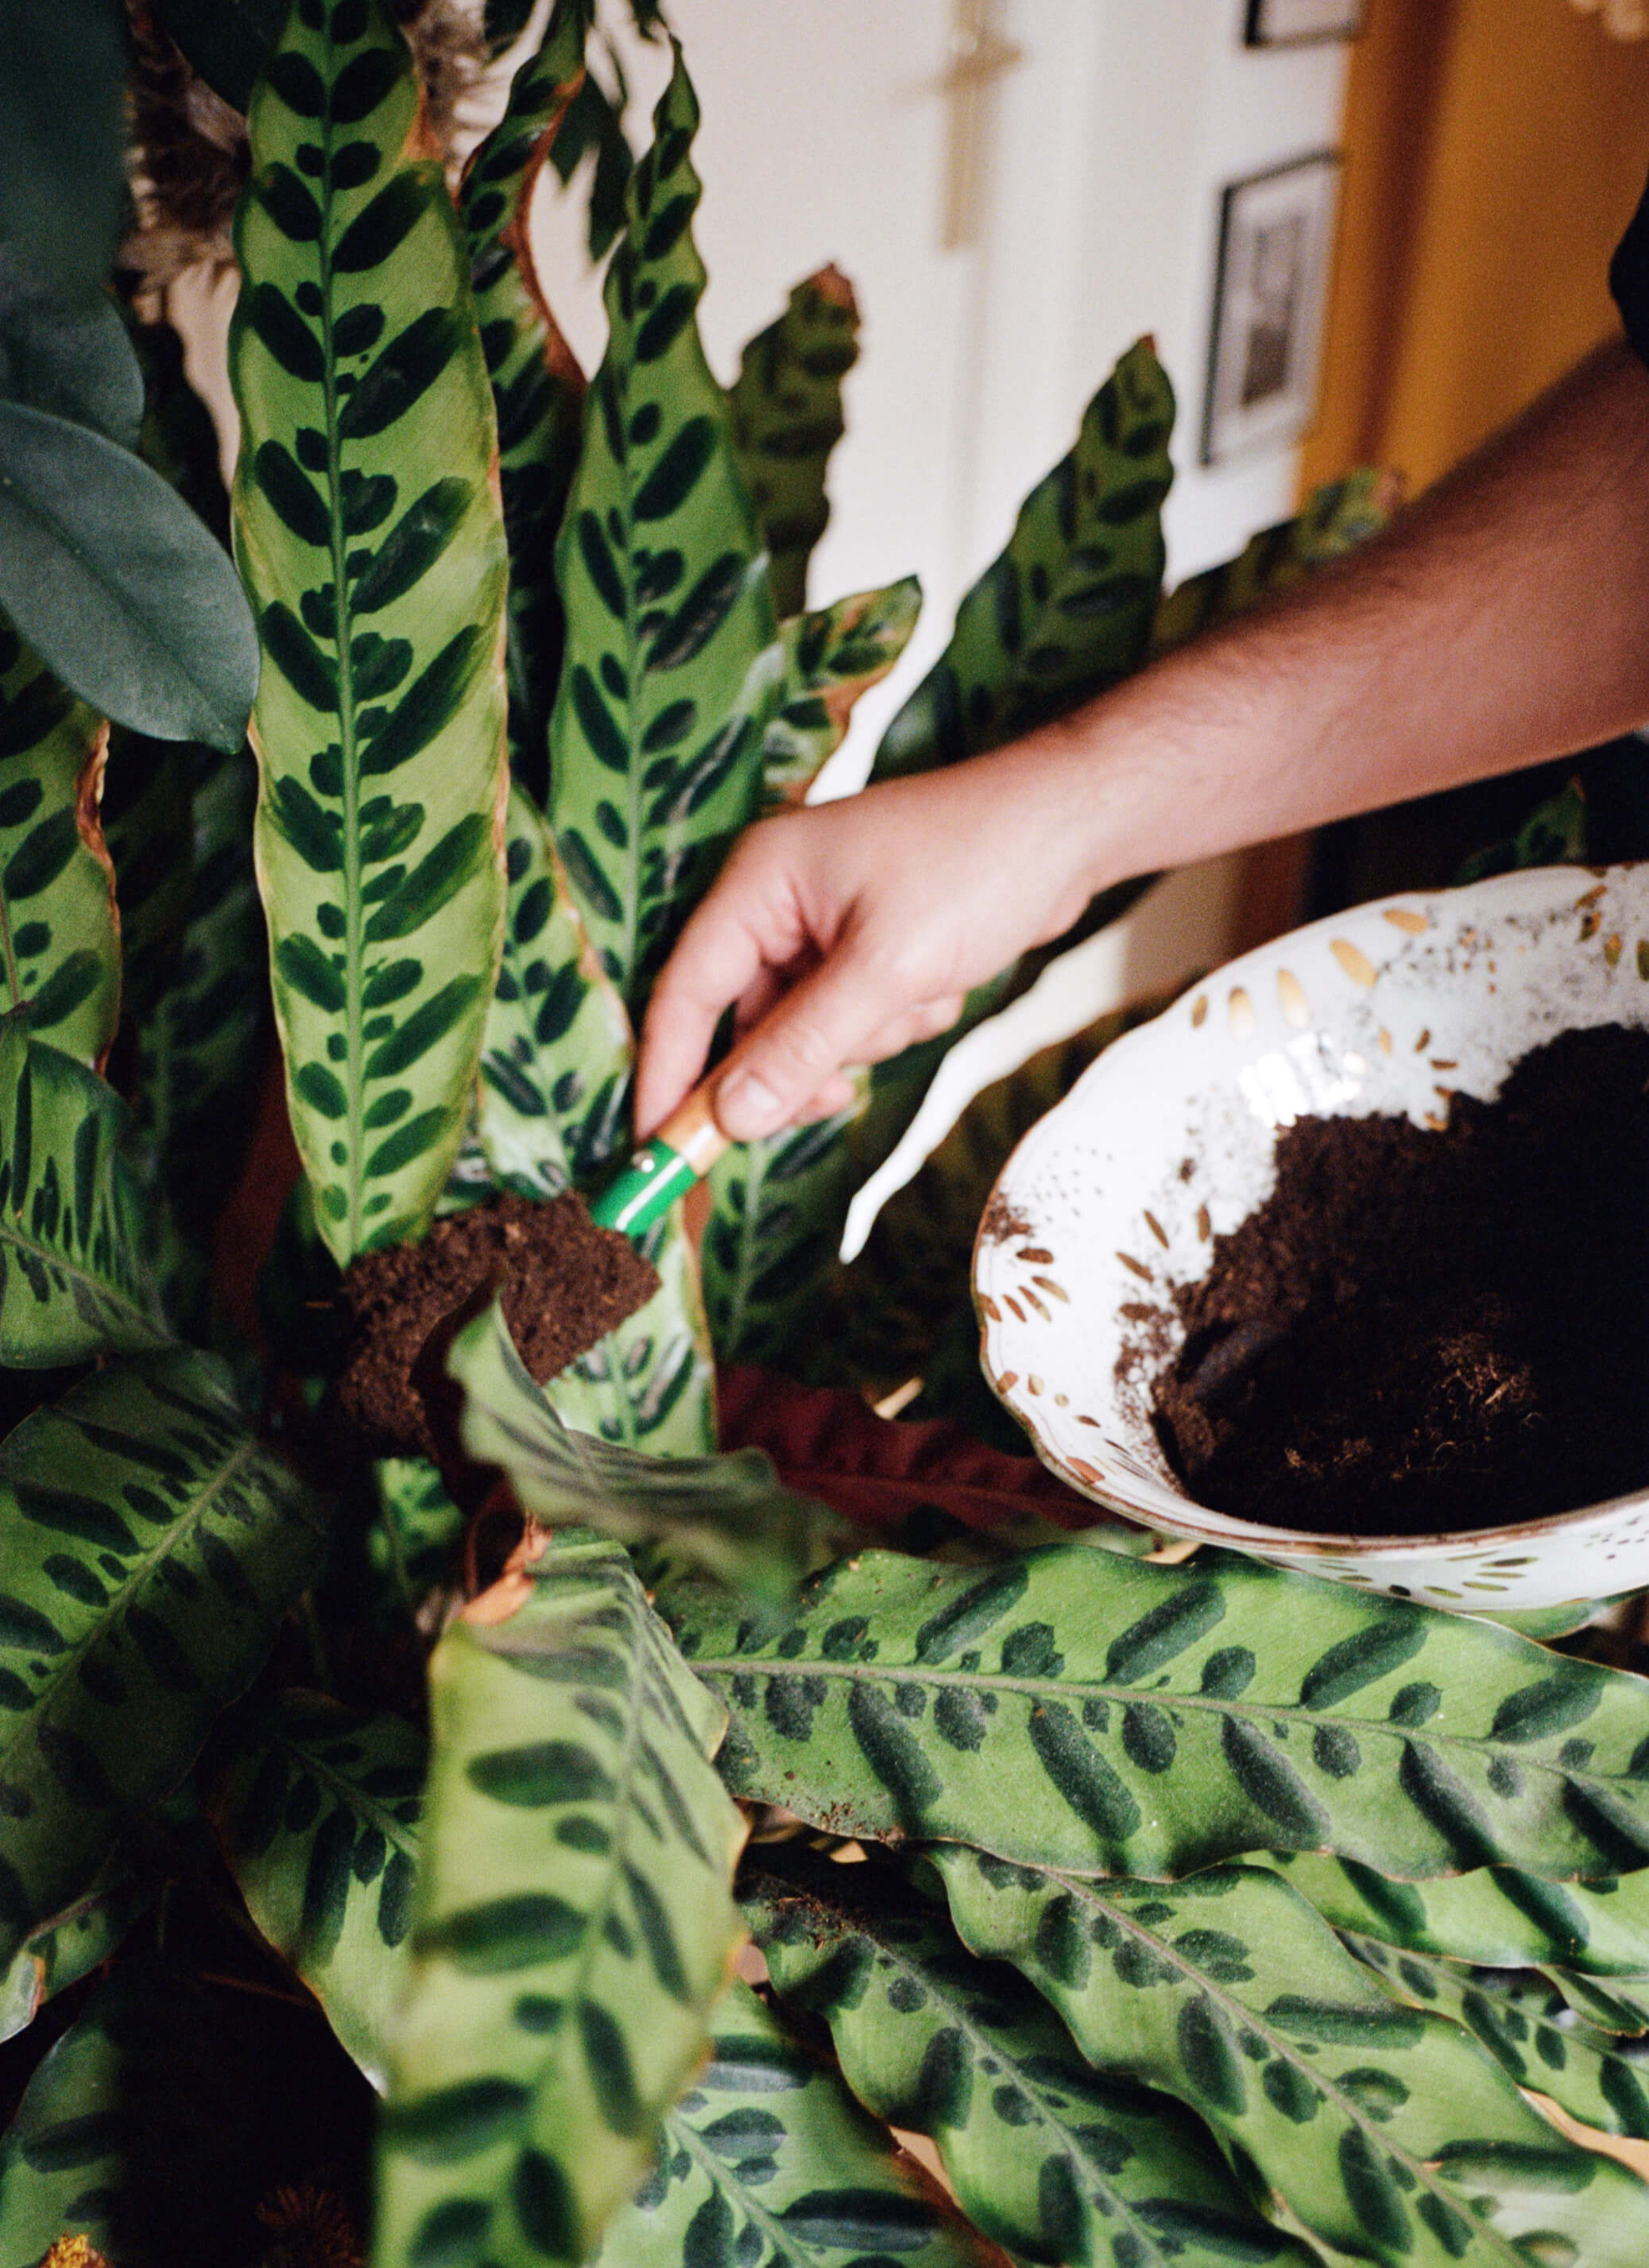 Arnold filled in more soil to the Rattlesnake plant with a bowl of soil and a green trowel.